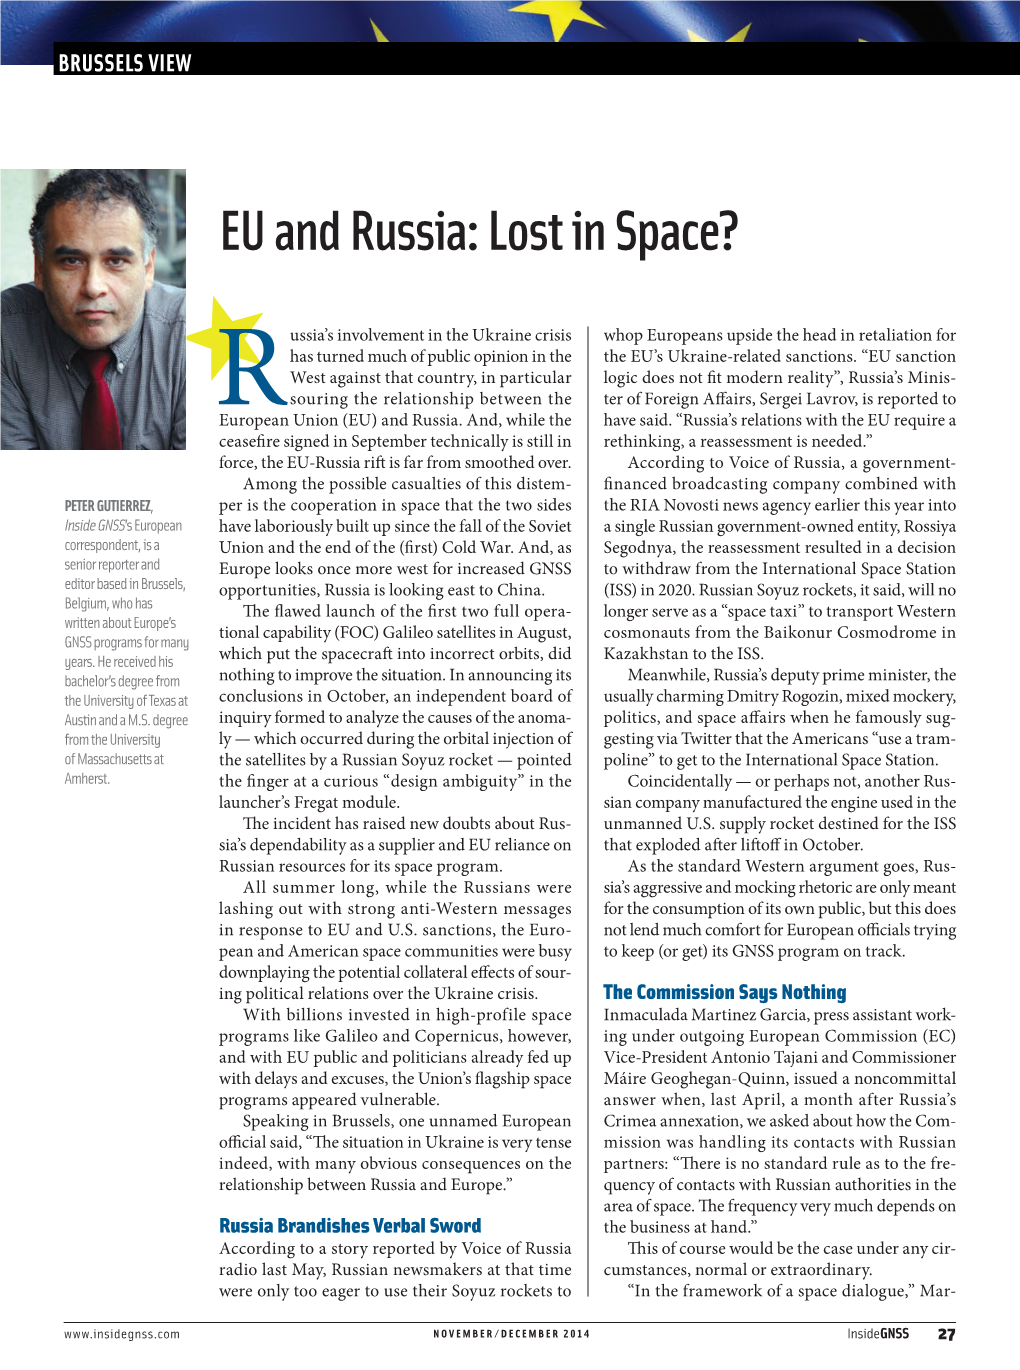 EU and Russia: Lost in Space?